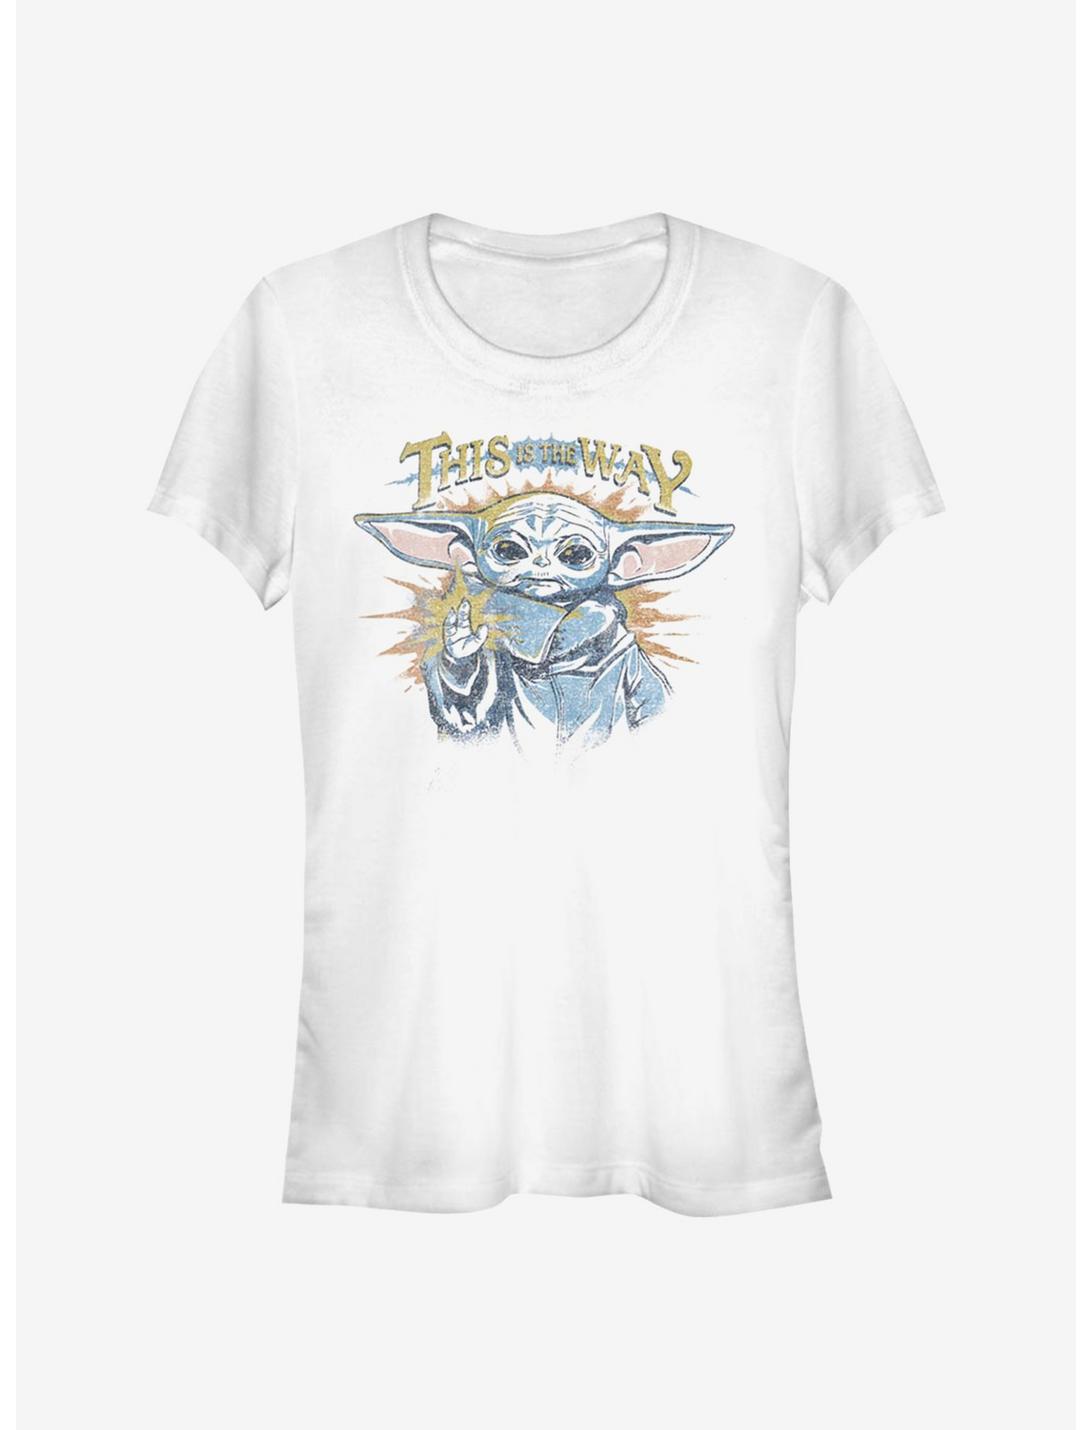 Star Wars The Mandalorian The Child Force Hands Girls T-Shirt, WHITE, hi-res